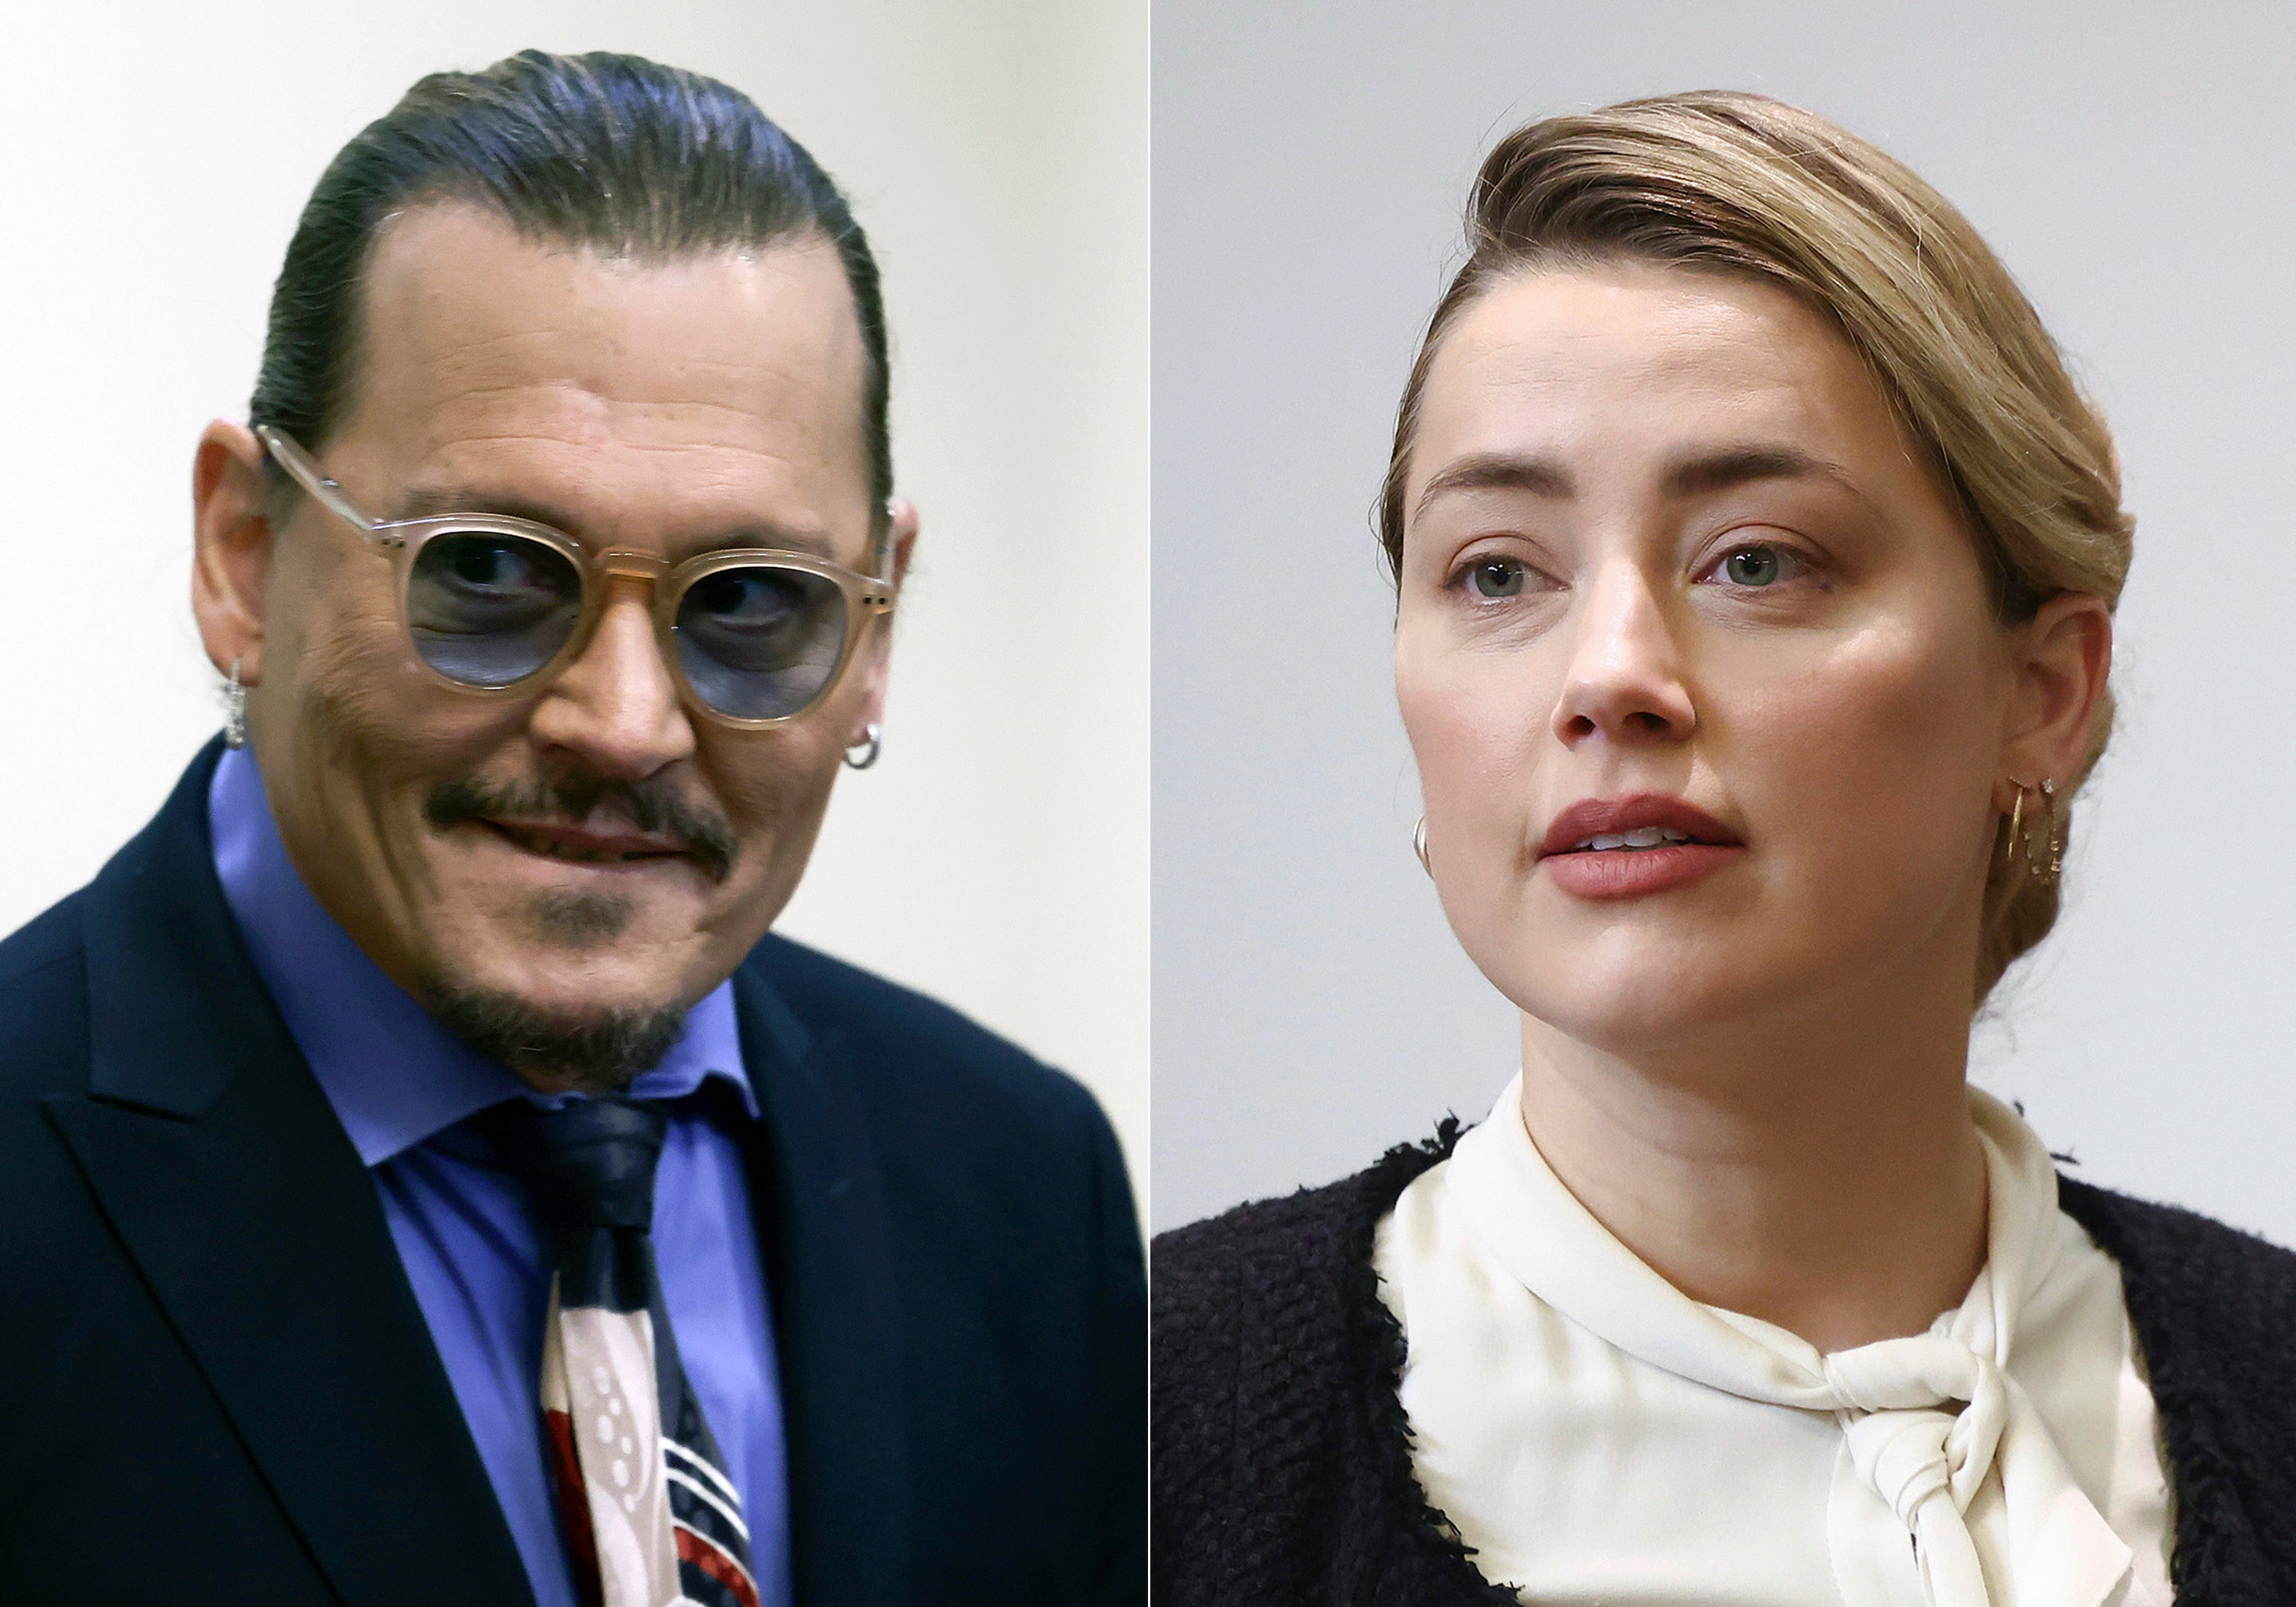 The couple’s age gap was raised by the media well before Depp announced he was suing Heard